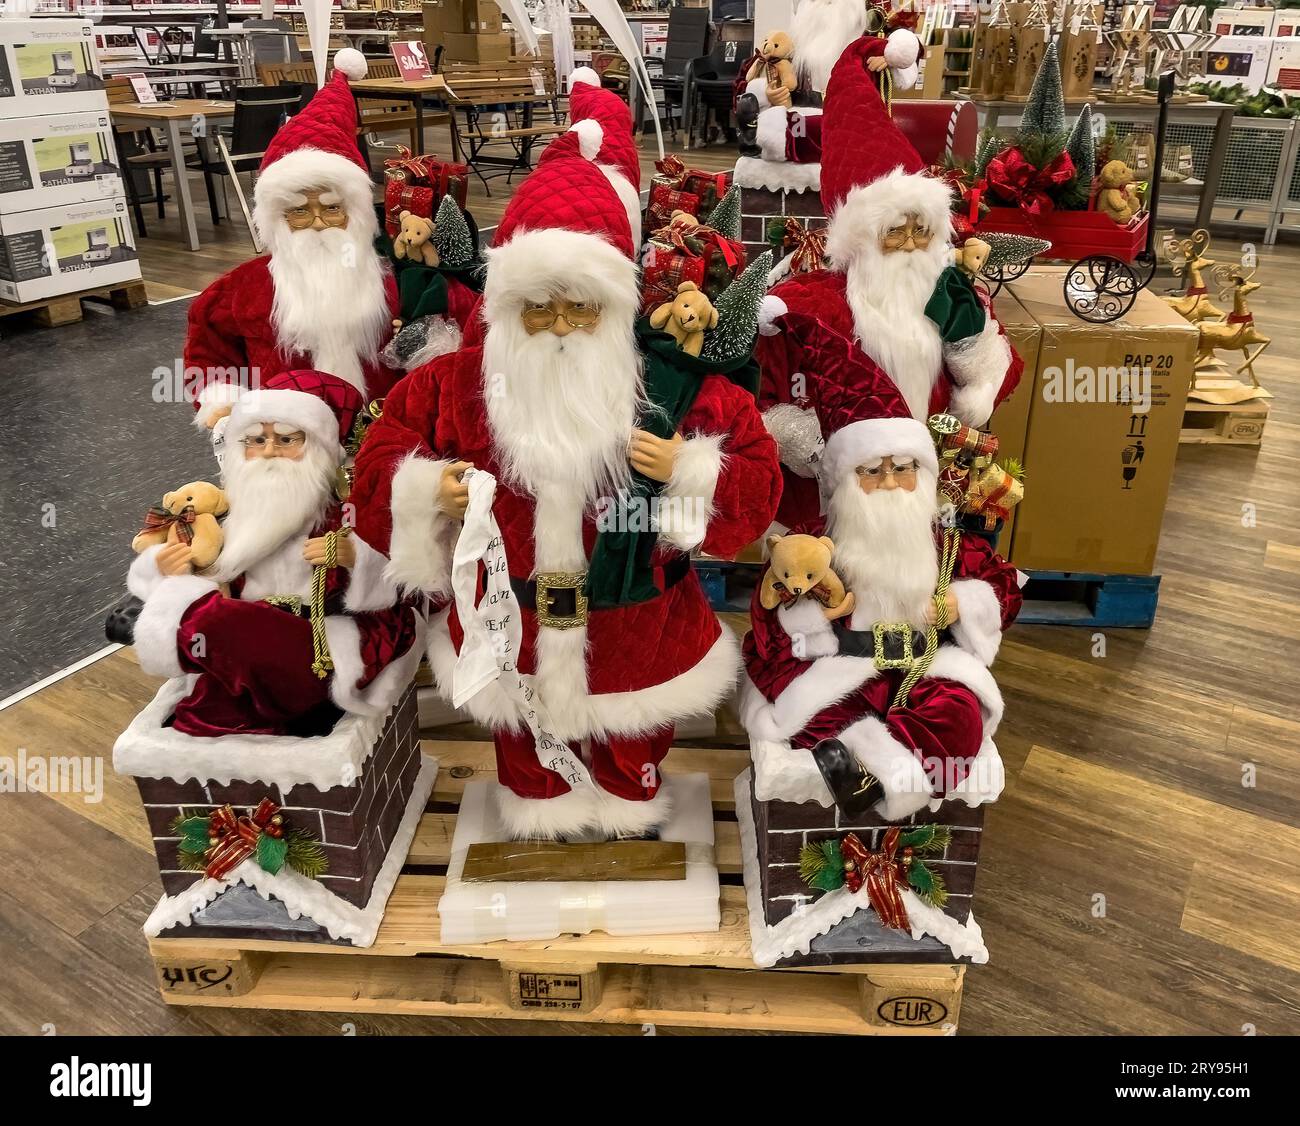 Sales offer of wholesale in early autumn of Christmas decoration decoration for Christmas with different sized Santas, Germany Stock Photo